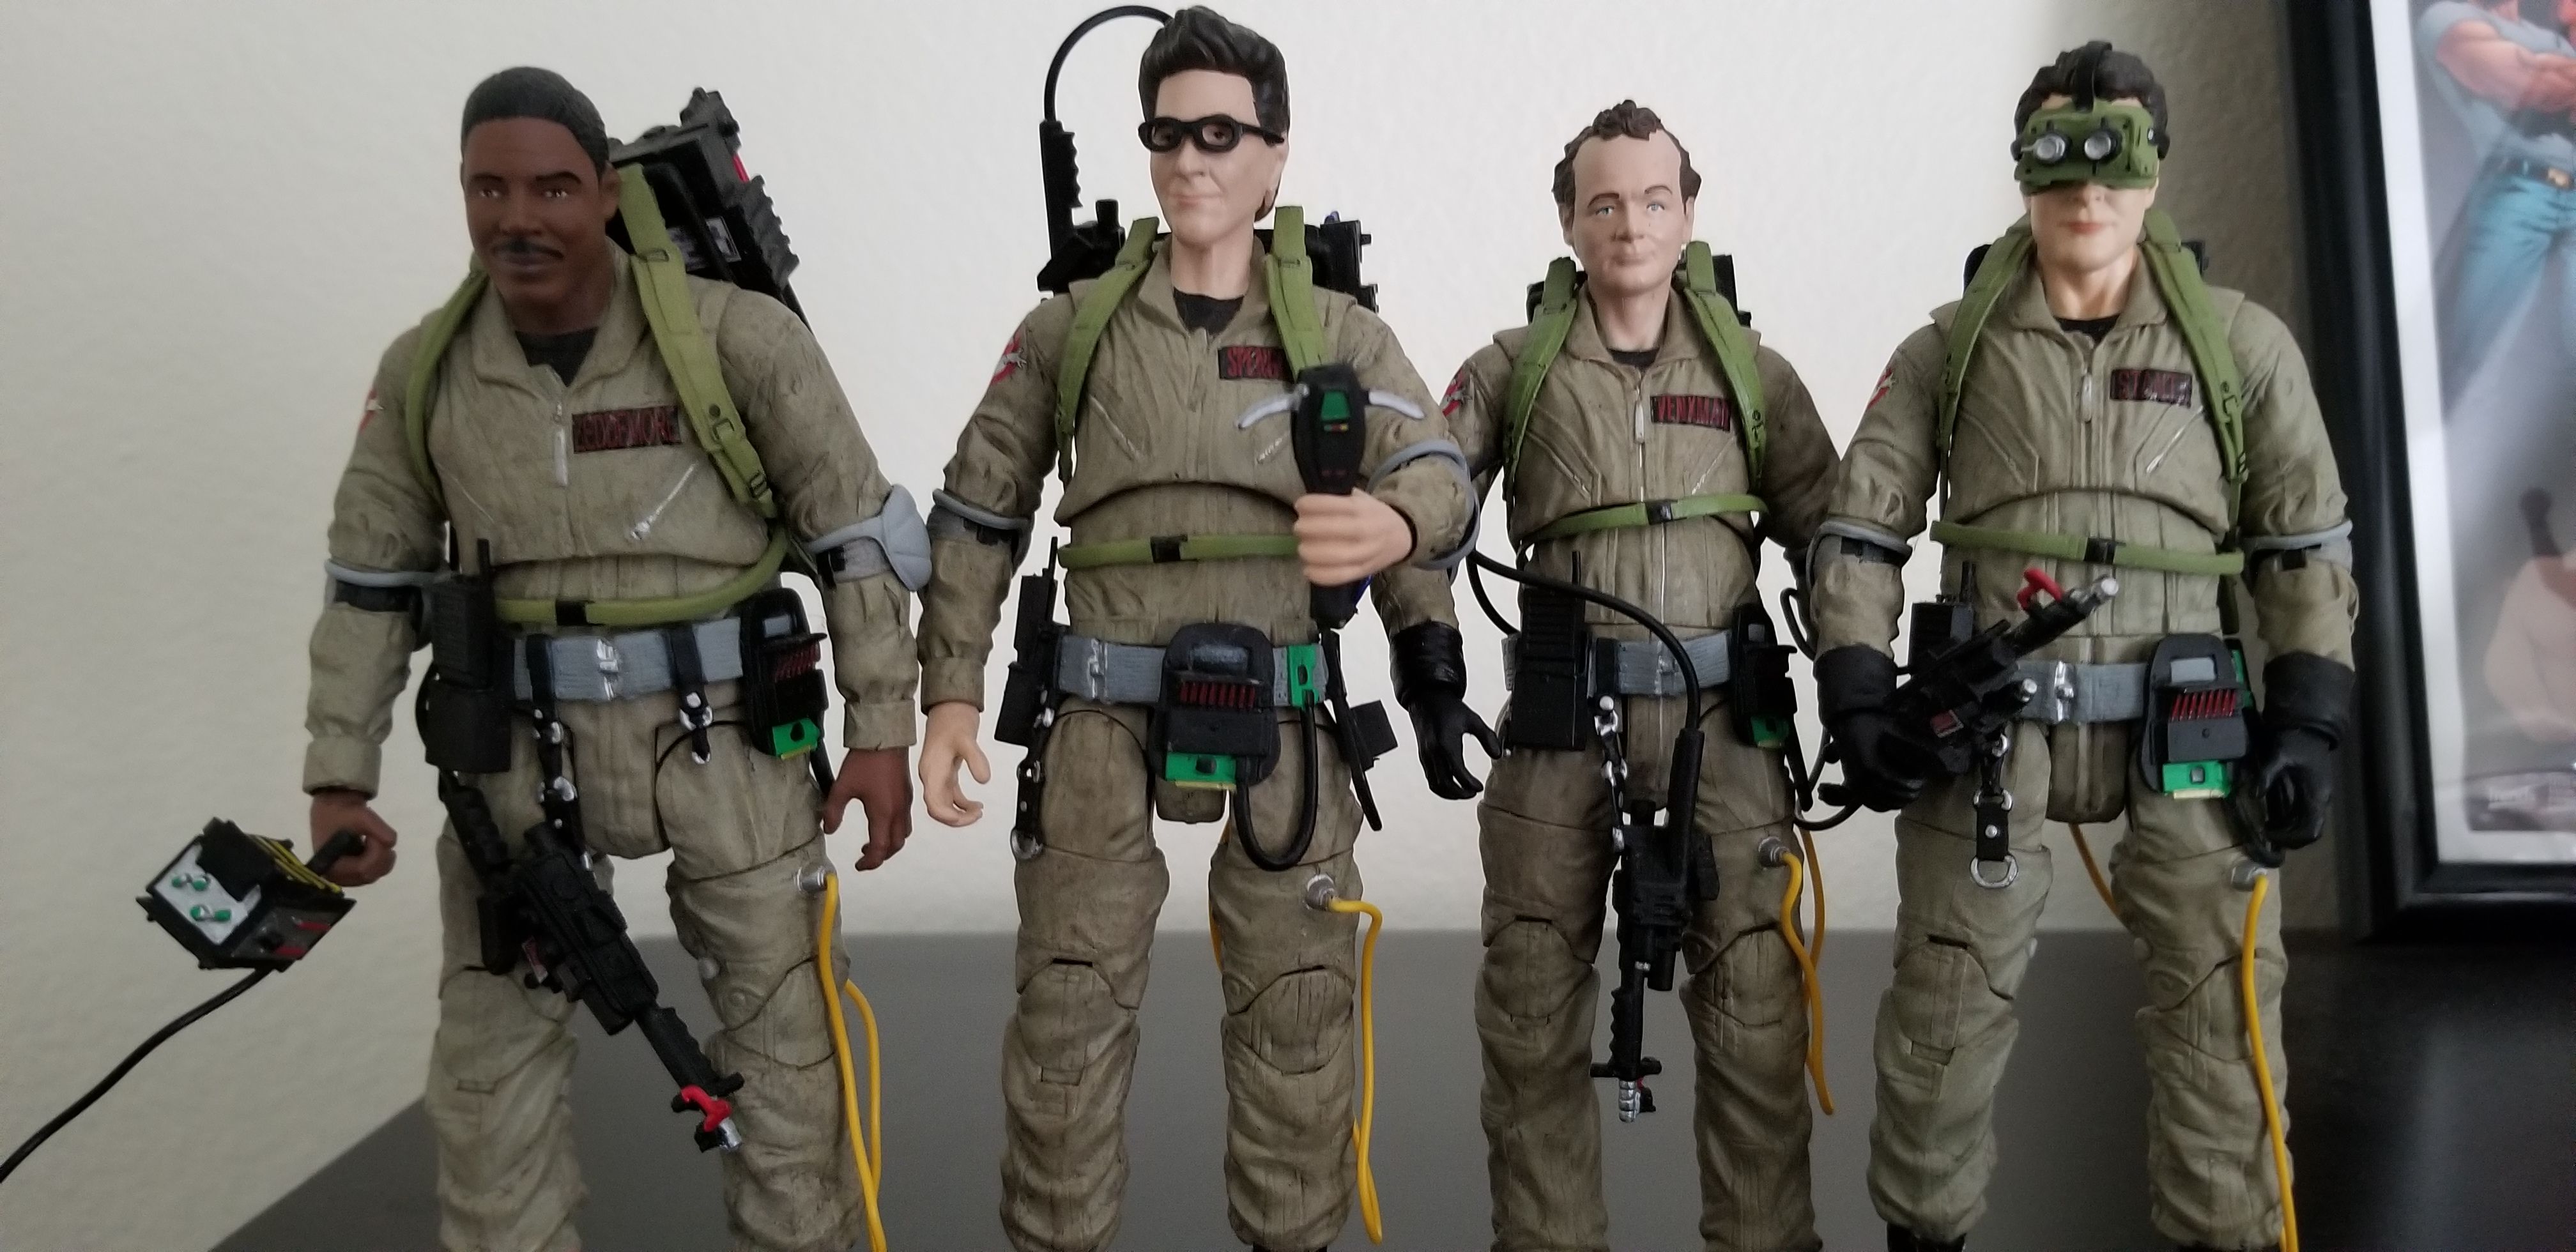 Diamond Select Ghostbusters 7 inch scale action figure set Neca Mcfarlane zombie ghost slime 1984